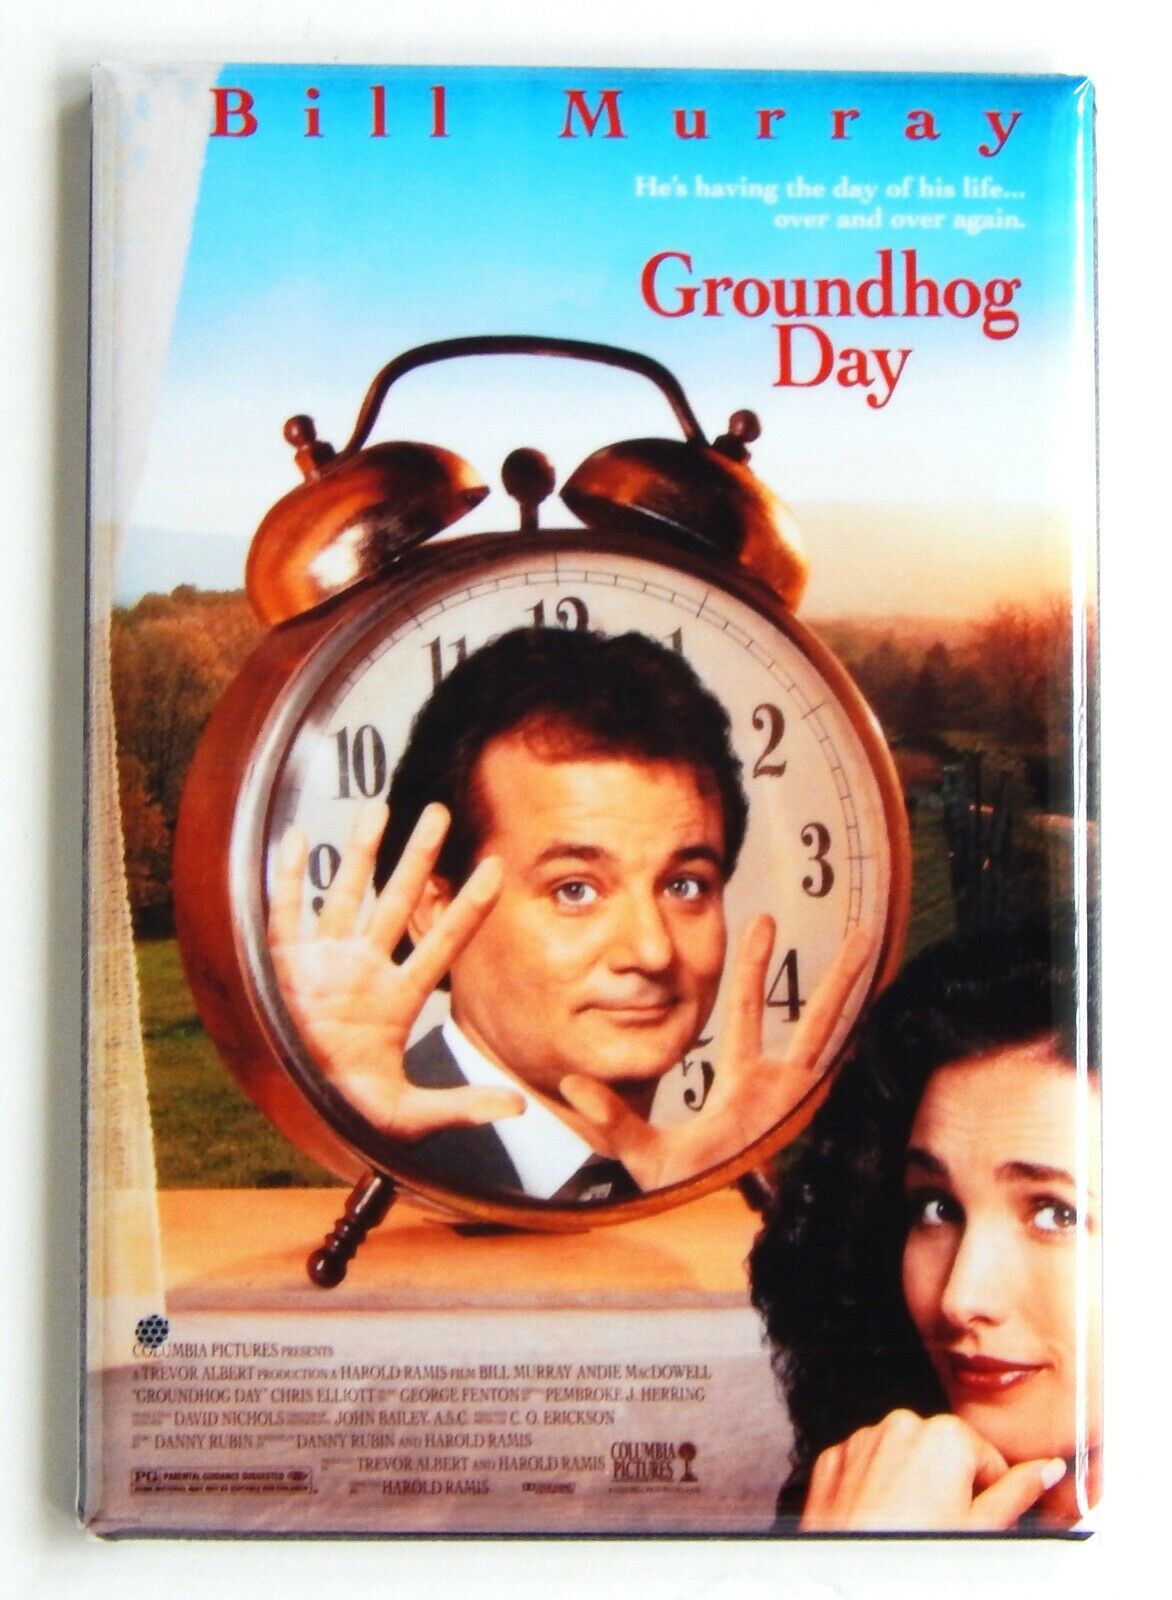 Groundhog Day Movie Wallpapers